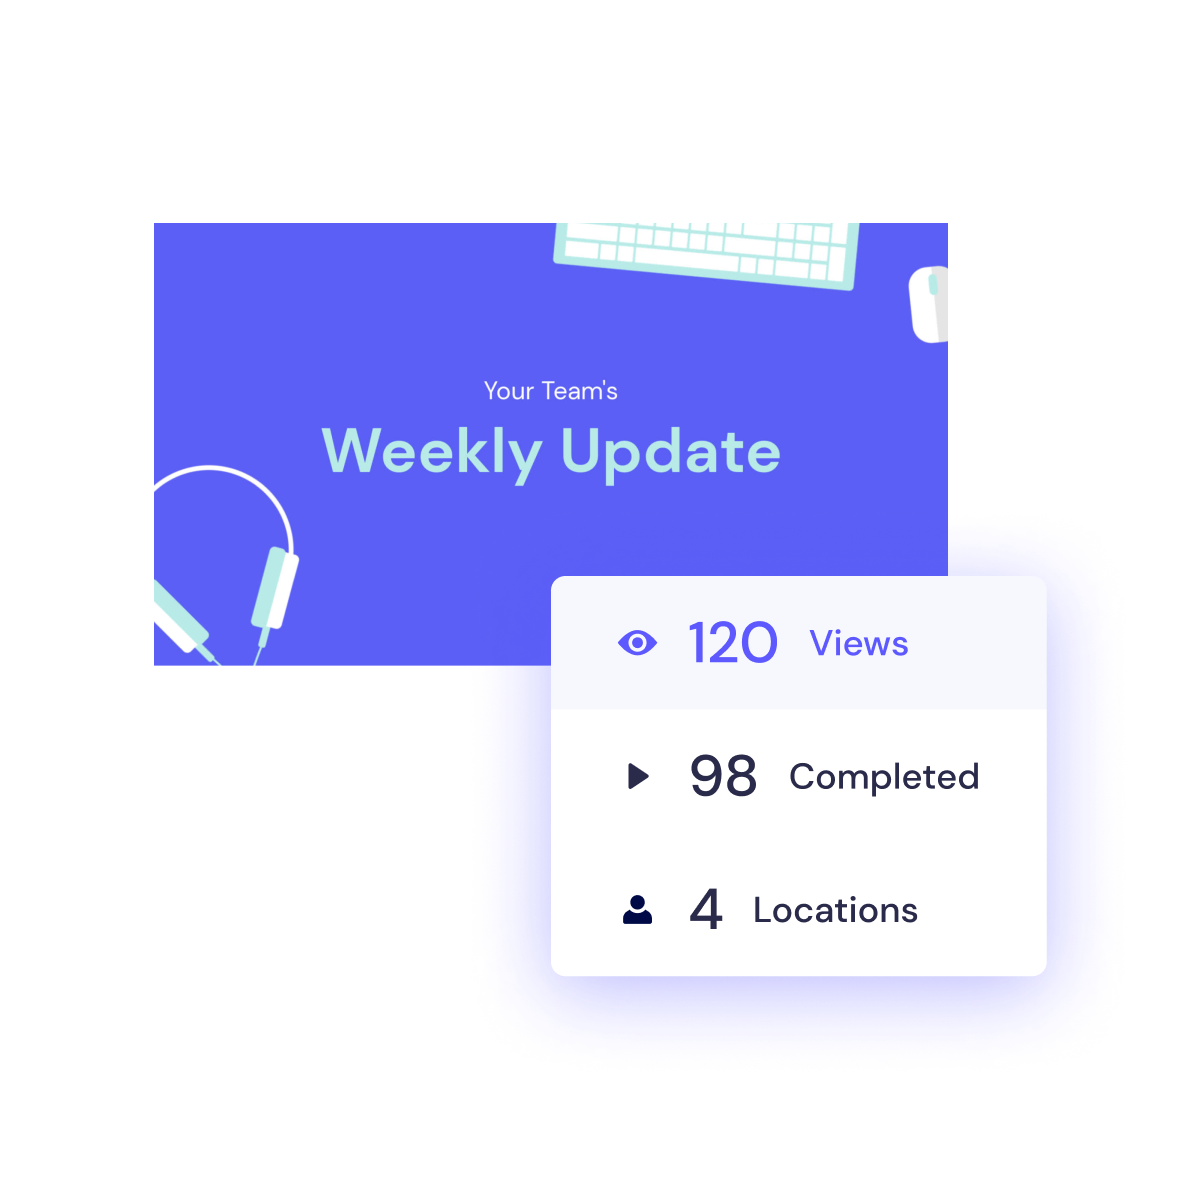 Illustration of a digital report titled "weekly update," showing 120 views, 98 completed, and information available at 4 locations.